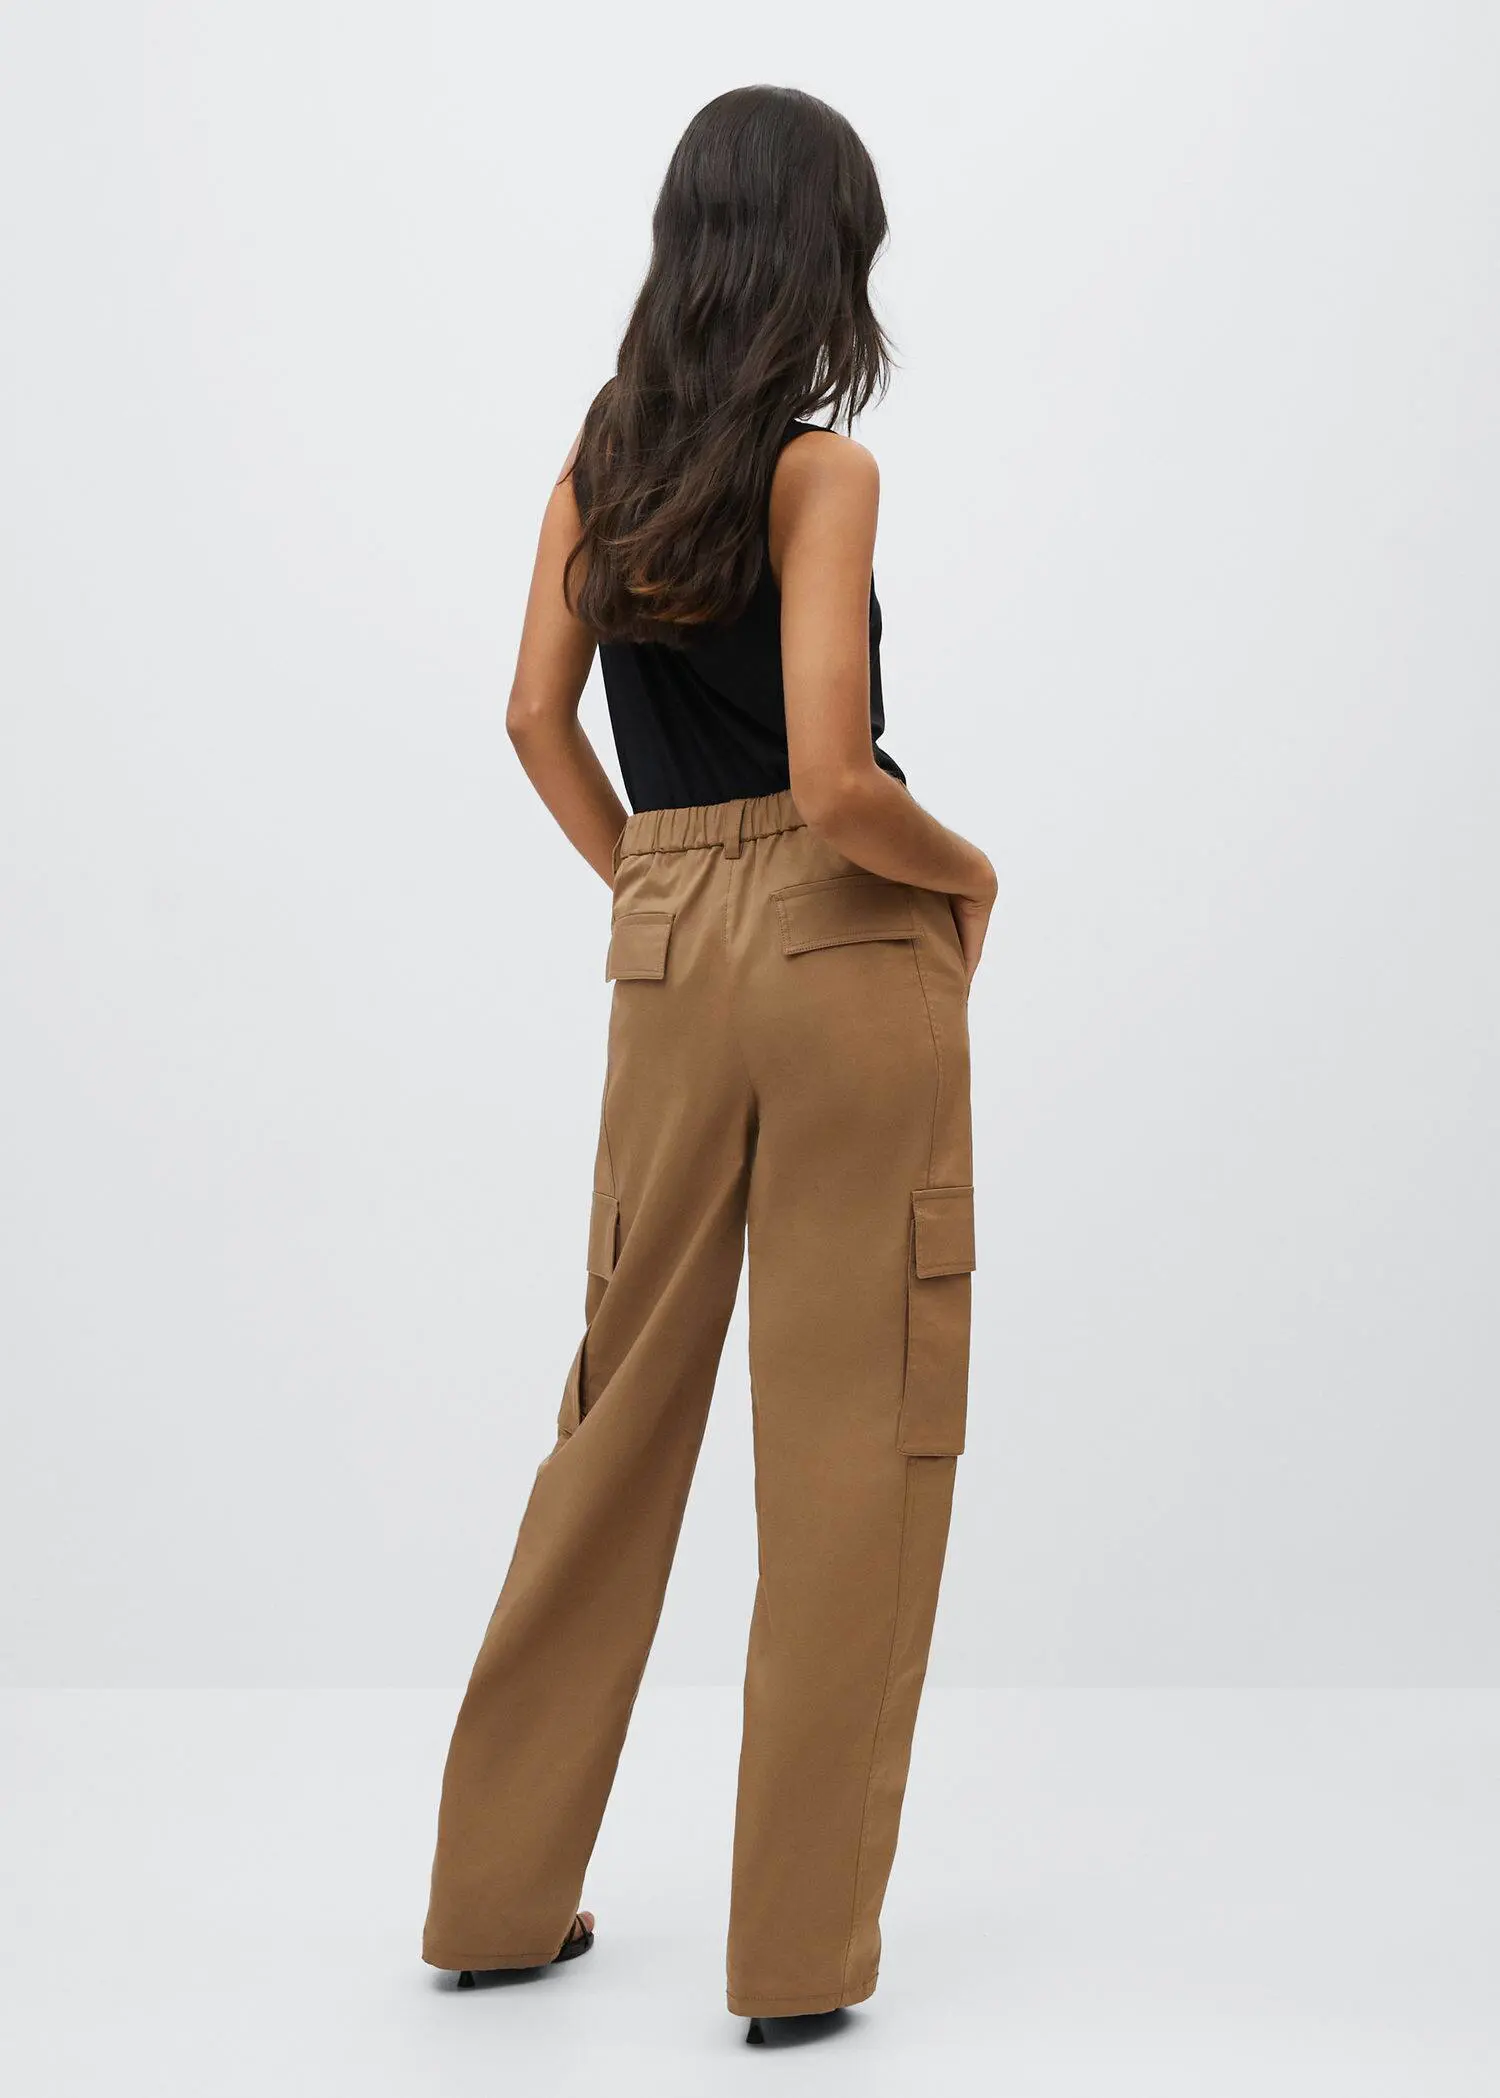 Mango Flowy strap top. a woman wearing a black top and brown pants. 